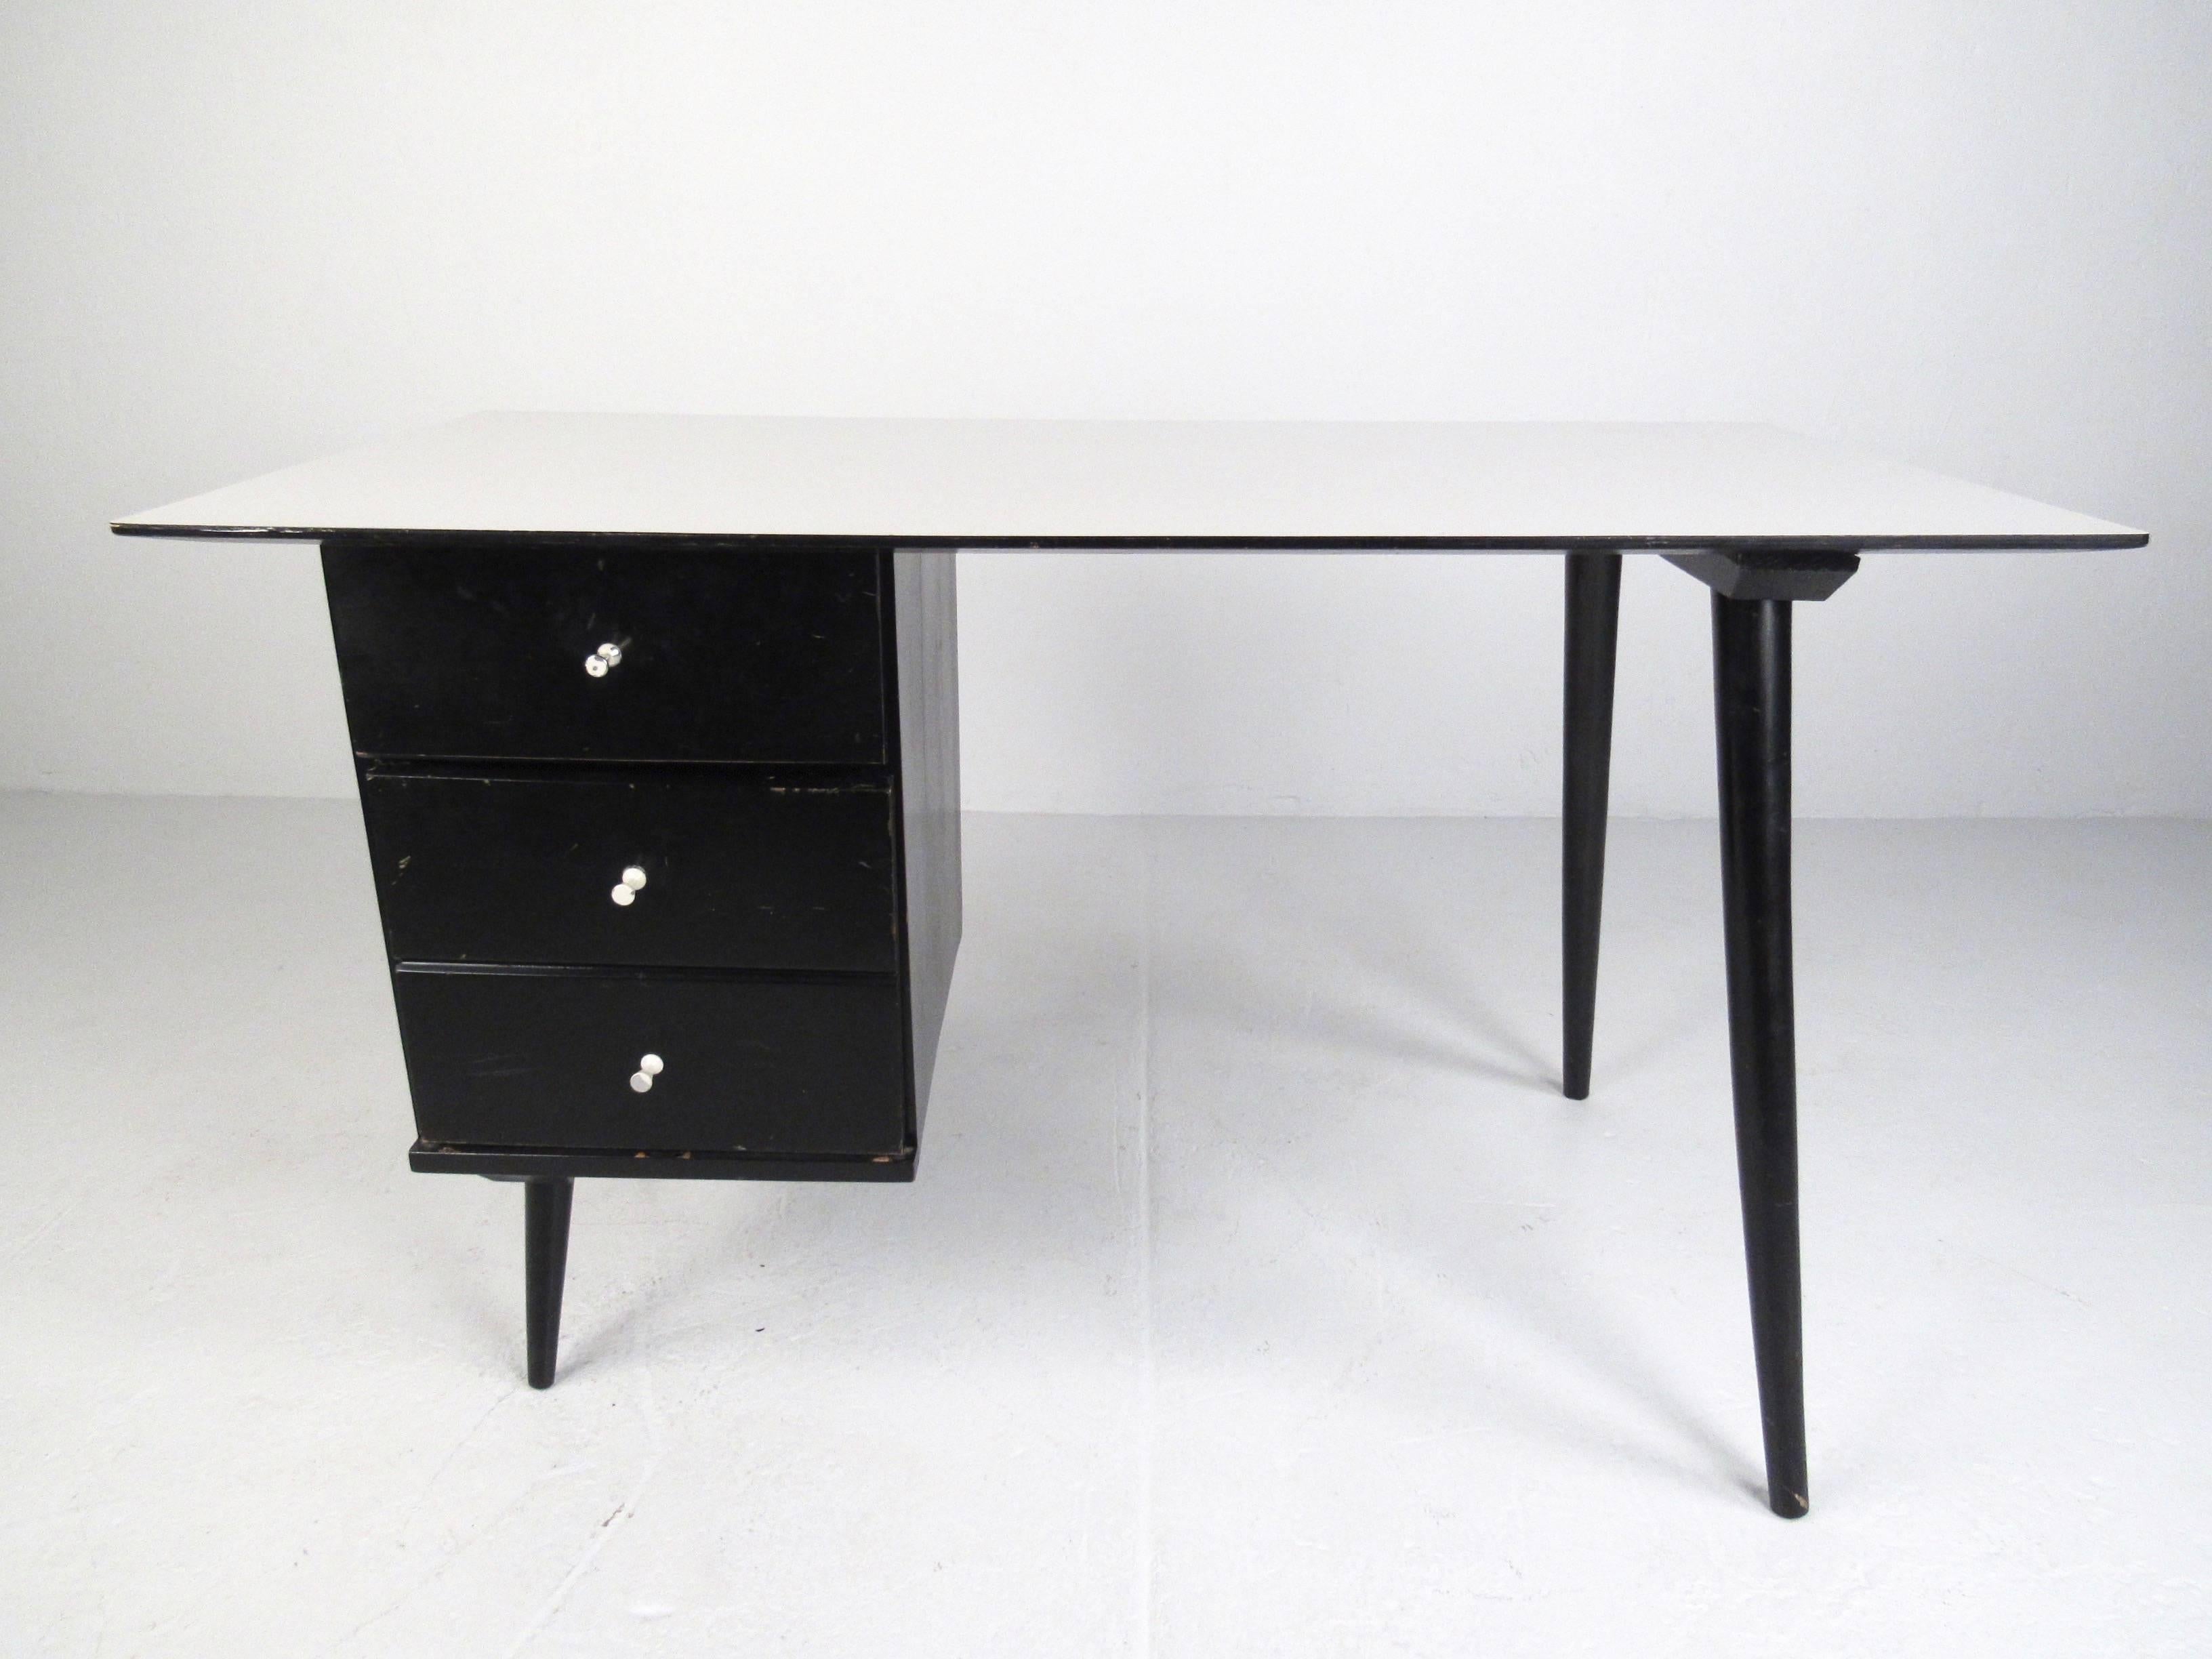 This vintage modern pedestal desk features the iconic mid-century design of Paul McCobb. Single sided writing desk offers two drawers for storage and organization and a spacious formica-style top for work. Slender tapered legs and unique McCobb